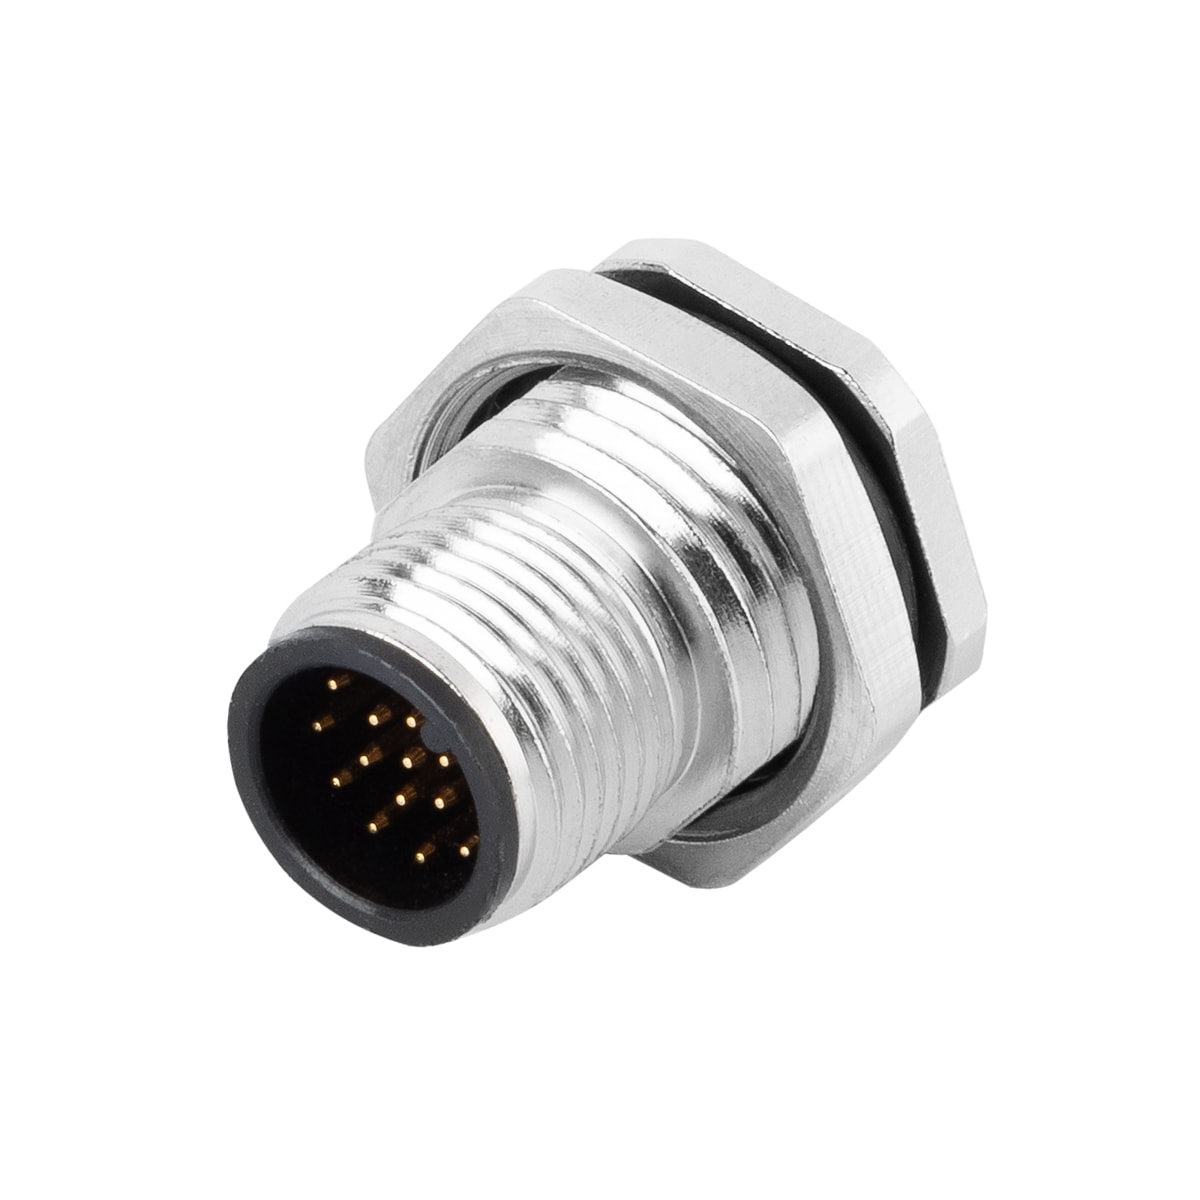 M12 panel receptacle, rear mount, male, contacts:12, pcb dip-solder connection for wires, A code, straight, IP67